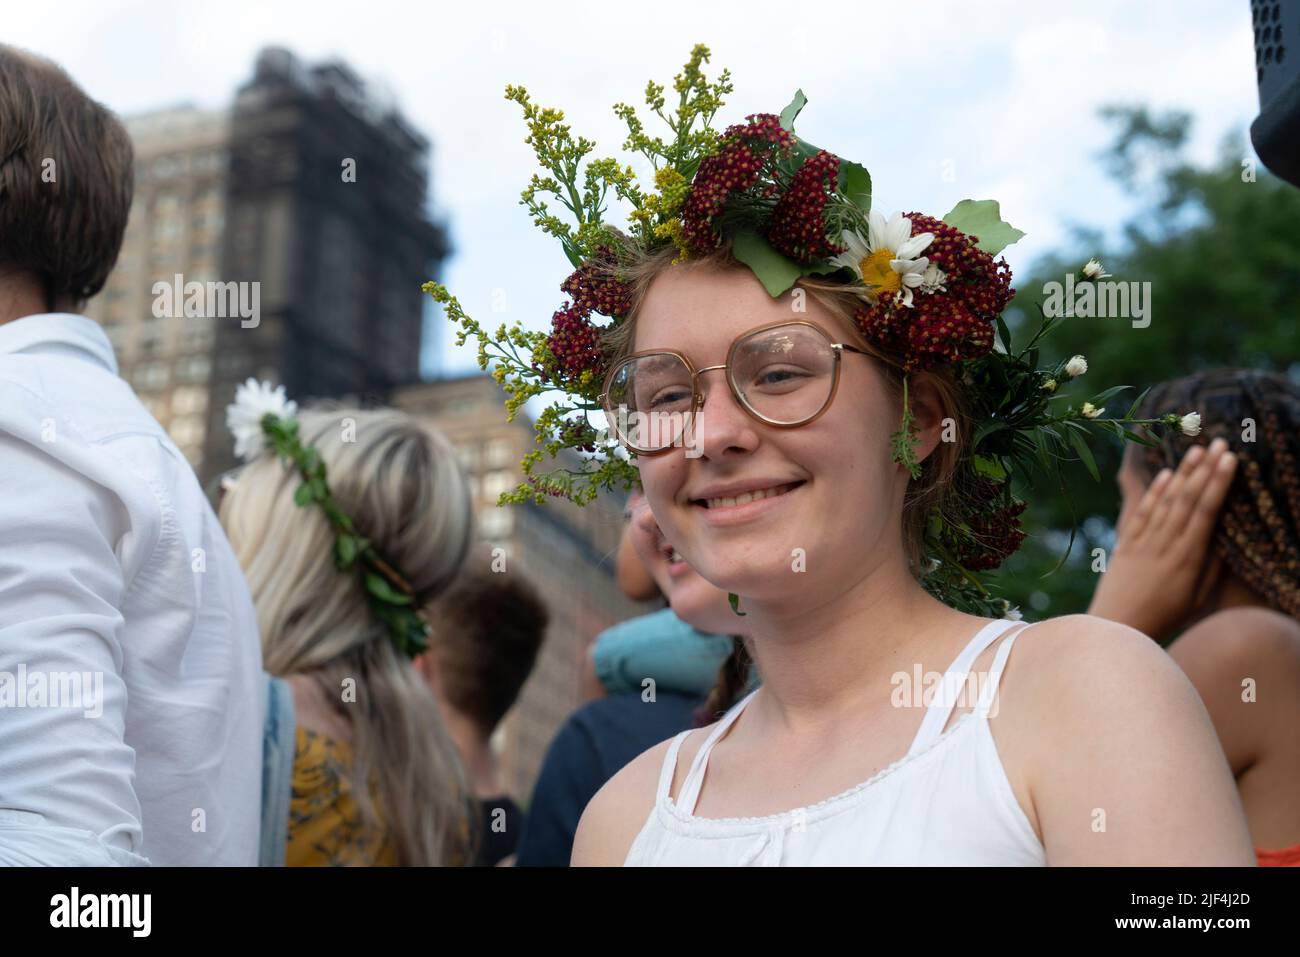 The Swedish Midsummer Festival in Battery Park City is the largest such celebration in New York City. It celebrates St. John's Day and the solstice. Stock Photo